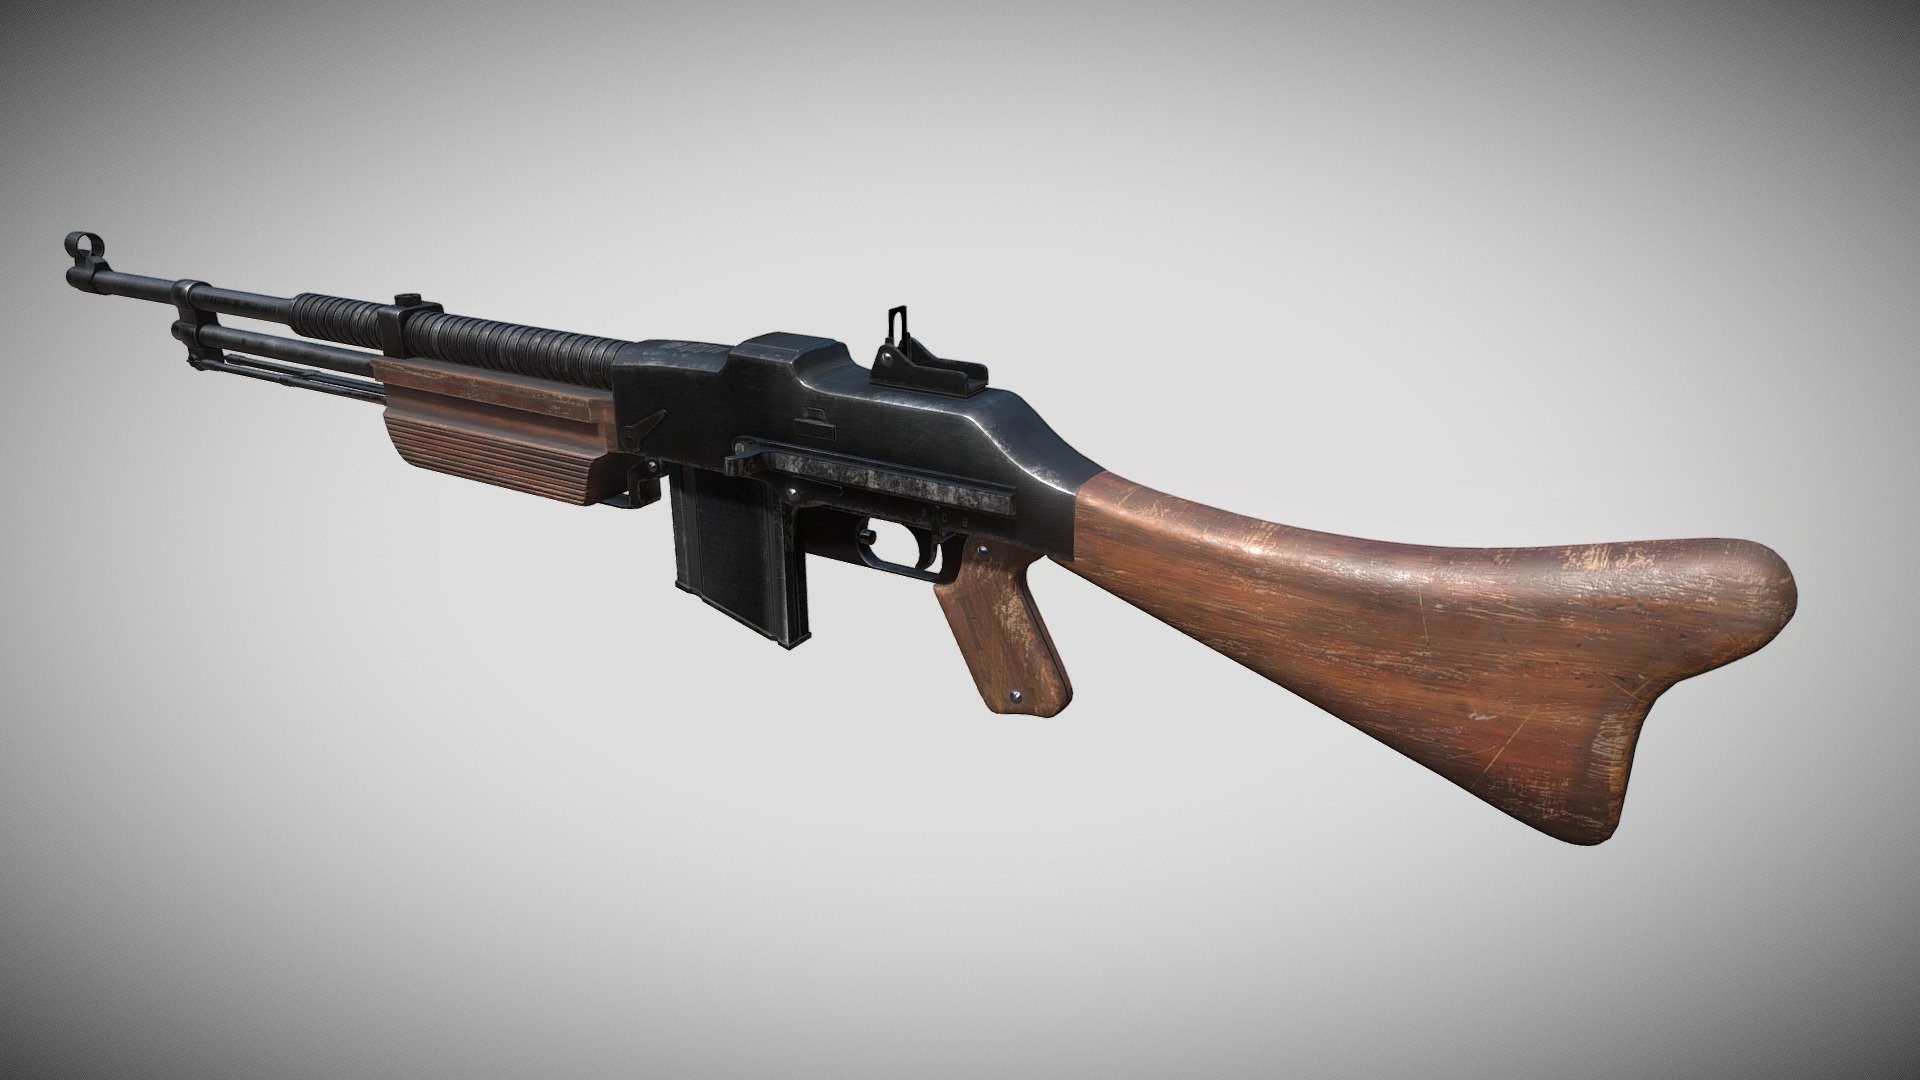 The Browning wz.1928 is a Polish version of the M1918 BAR. It was a light machine gun used by the Poles in World War II.

https://store.steampowered.com/app/1146300/Land_of_War__The_Beginning/ - Wz 28 Browning - Polish WW2 weapon (Land of War) - 3D model by msgames 3d model